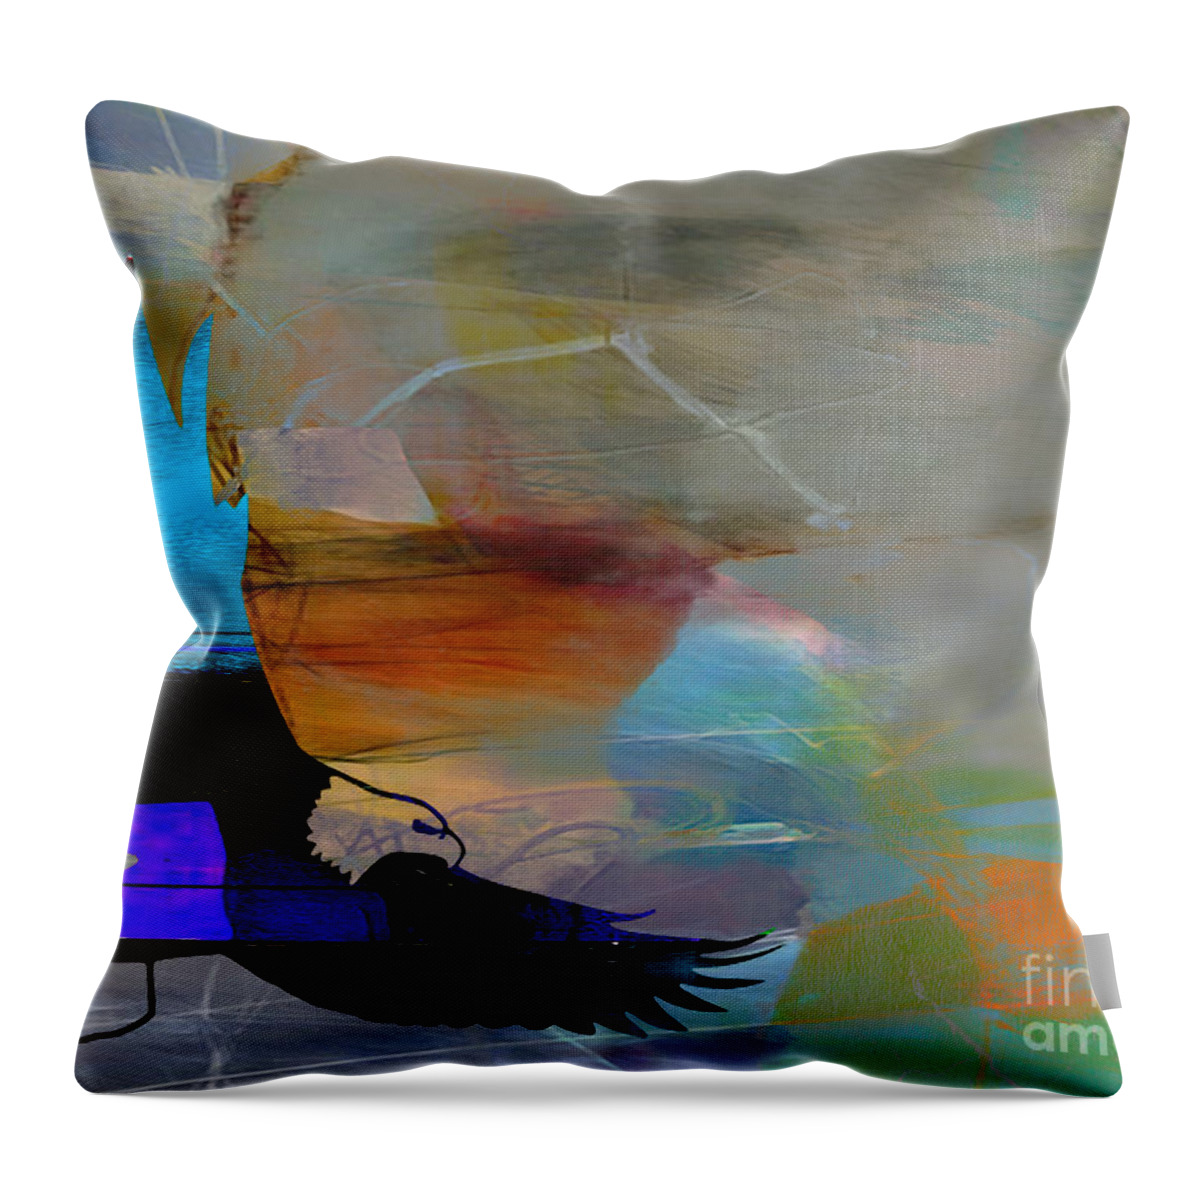 Eagle Throw Pillow featuring the mixed media Eagle by Marvin Blaine